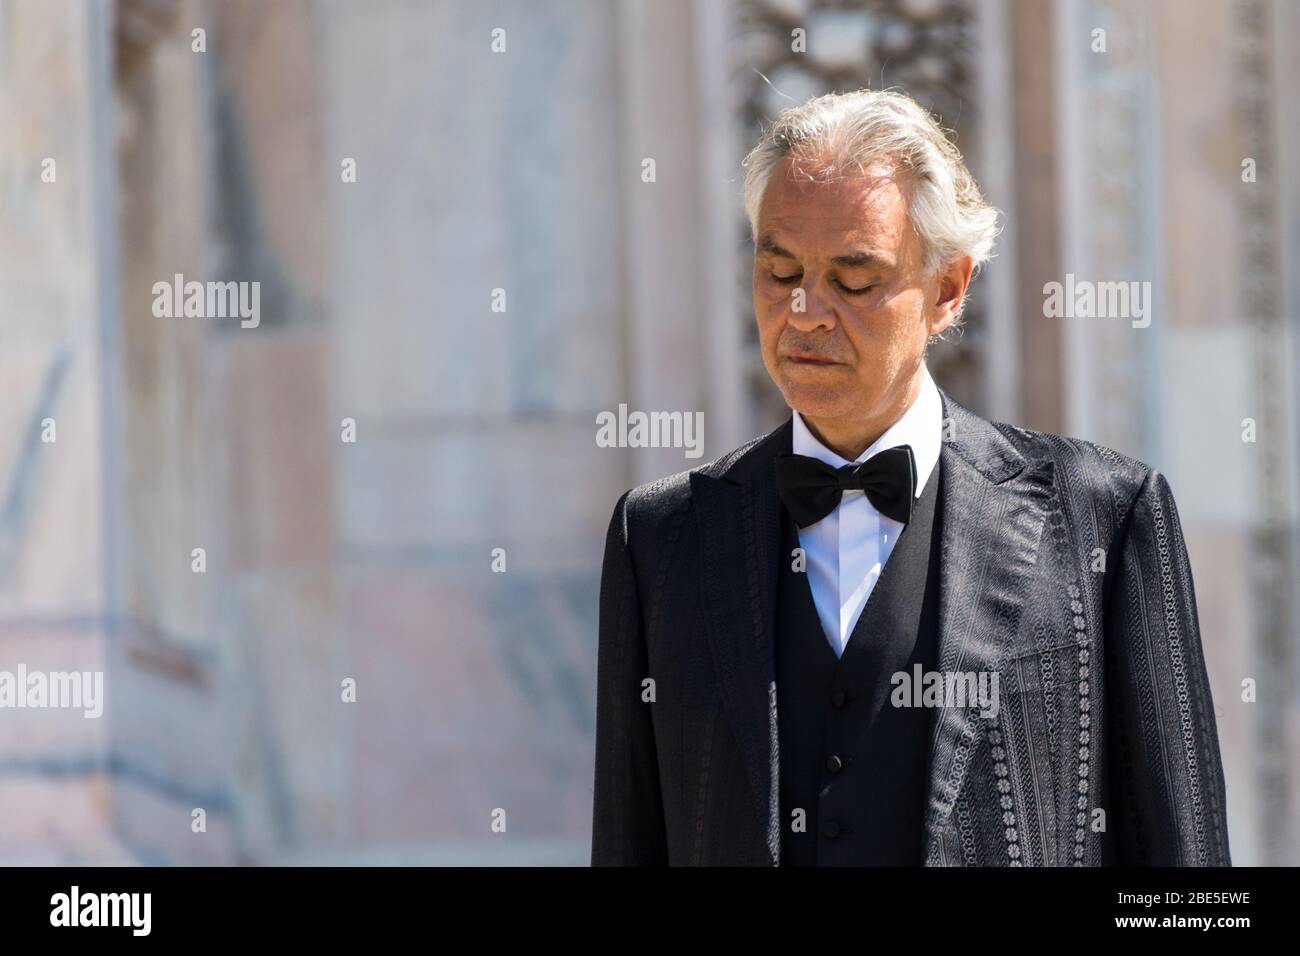 Duomo , Milano, Italy, 12 Apr 2020, Andrea Bocelli during Andrea Bocelli at the Duomo Cathedral -  - Credit: LM/Daniele Cifalà/Alamy Live News Stock Photo